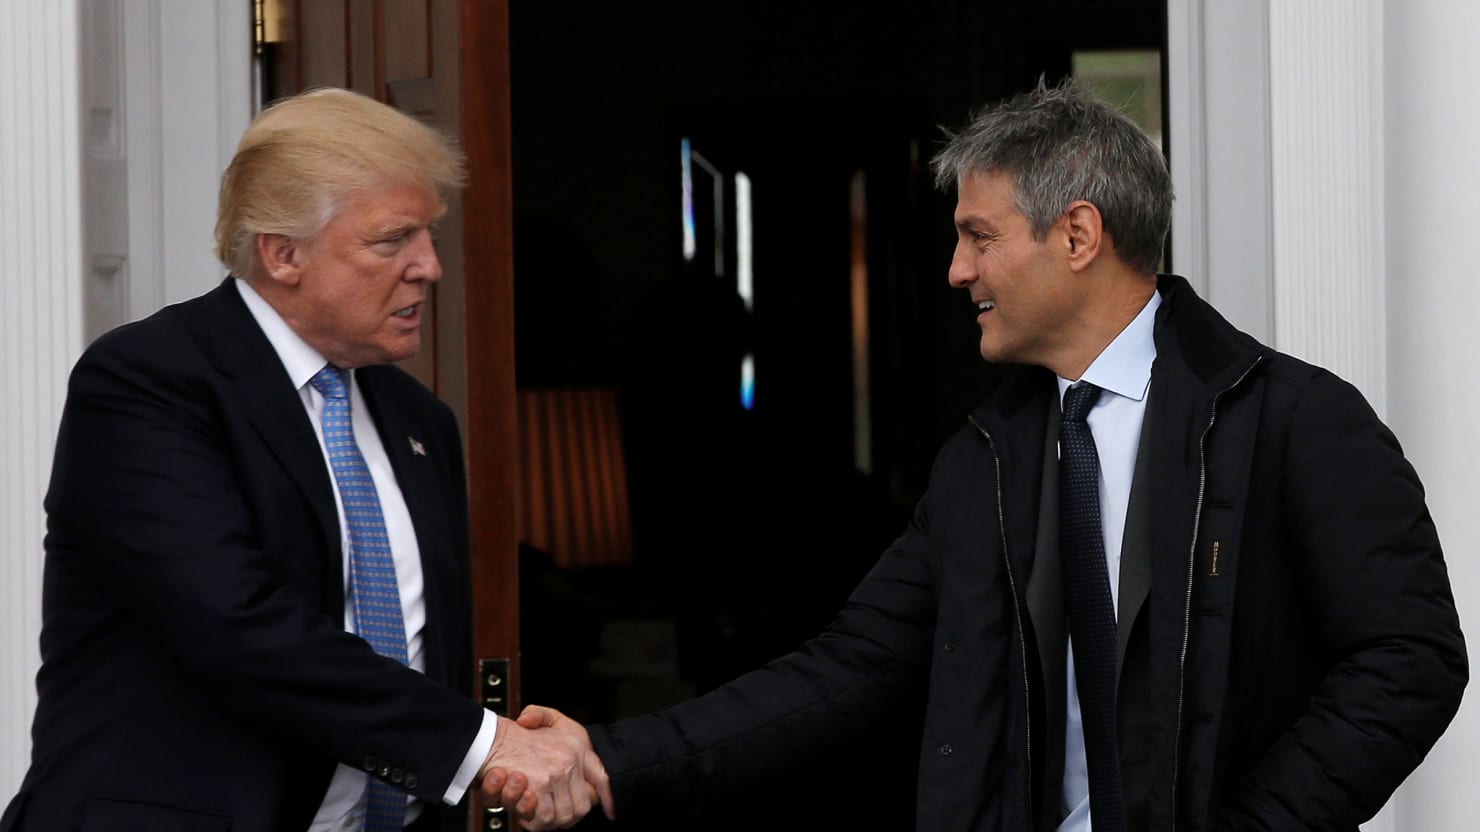 Did Ari Emanuel Cover for Donald Trump on the Miss Universe Tapes?